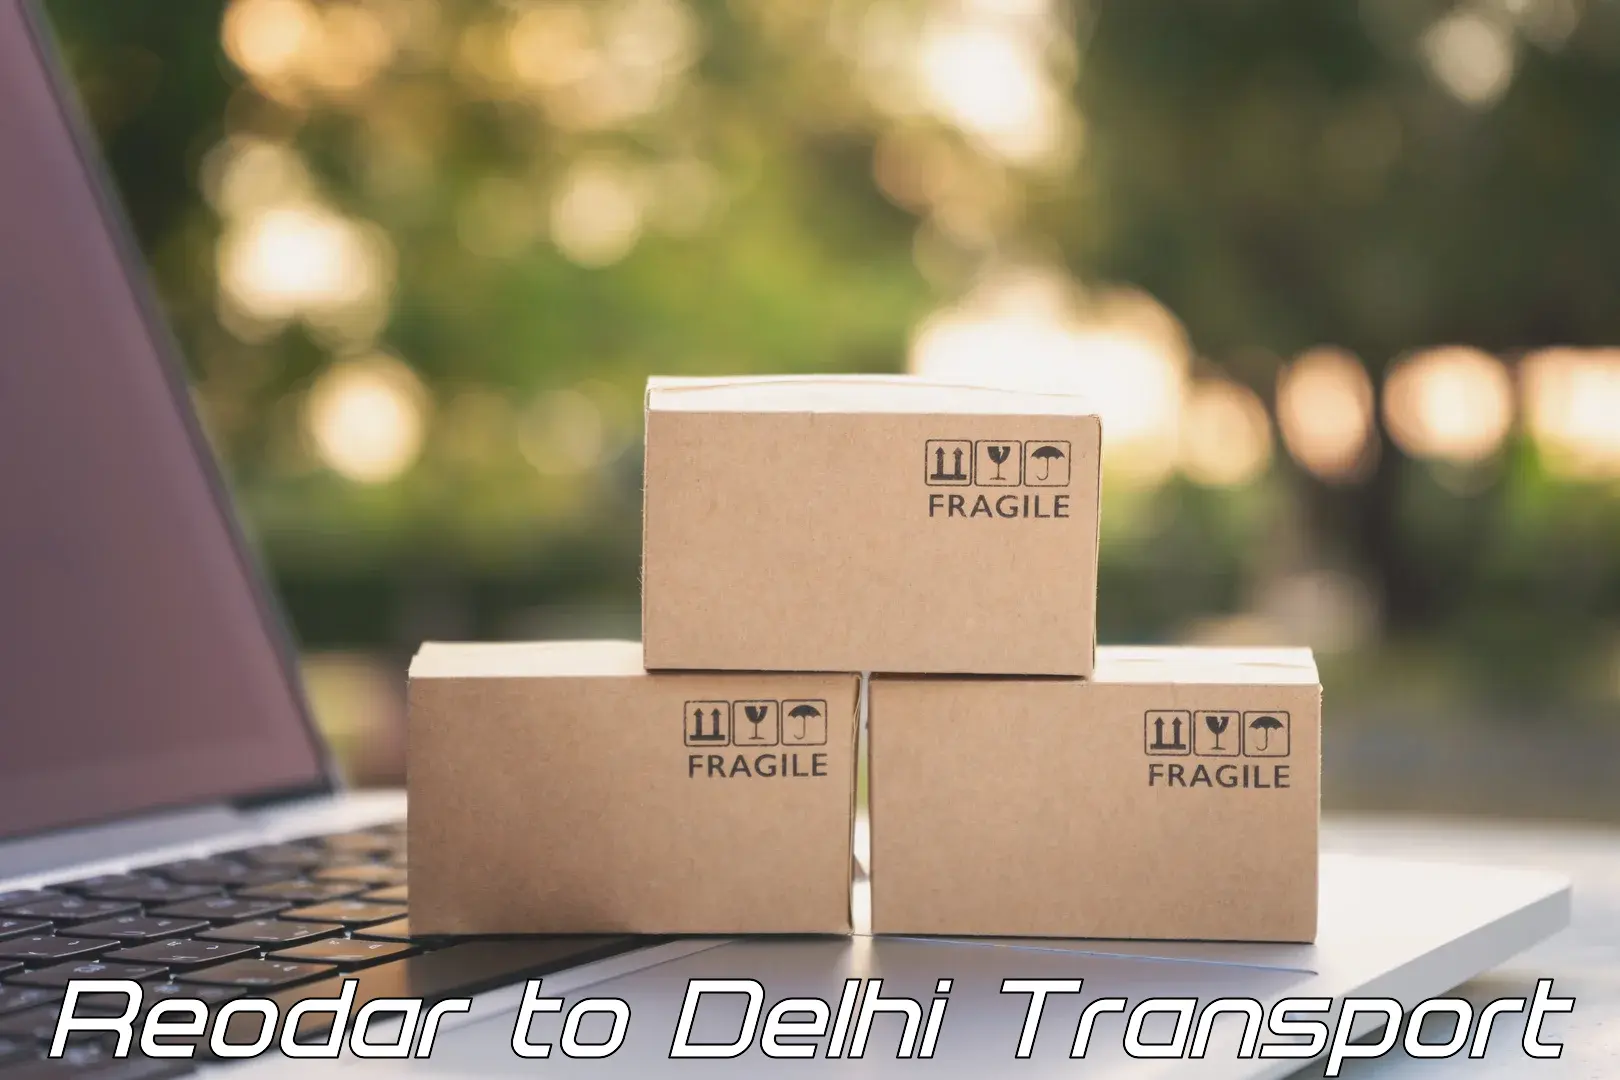 Transport bike from one state to another Reodar to University of Delhi